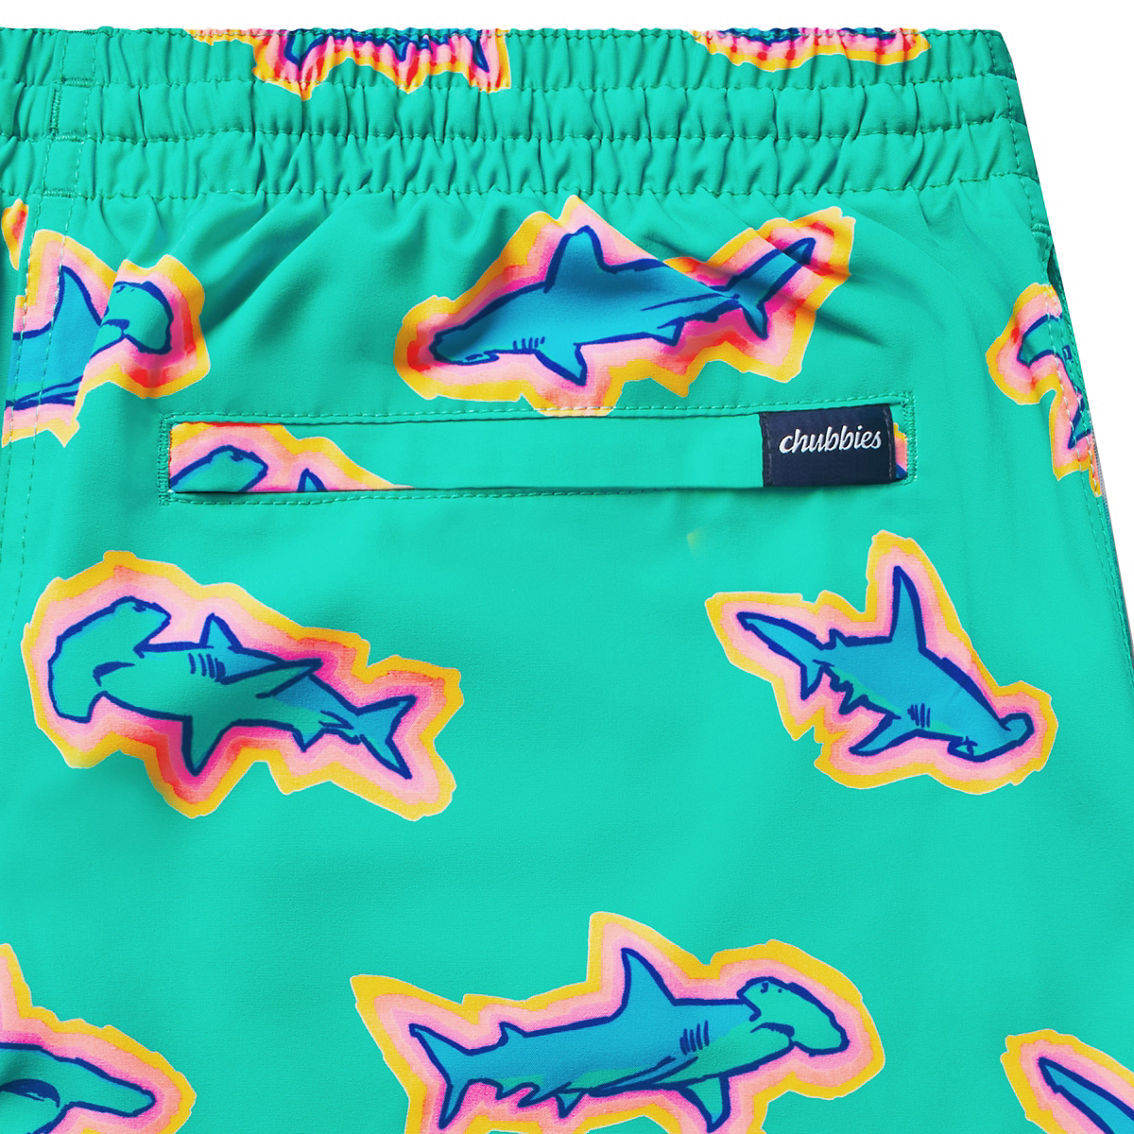 Chubbies The Apex Swimmers 5.5 in. Lined Classic Swim Trunks - Image 3 of 3